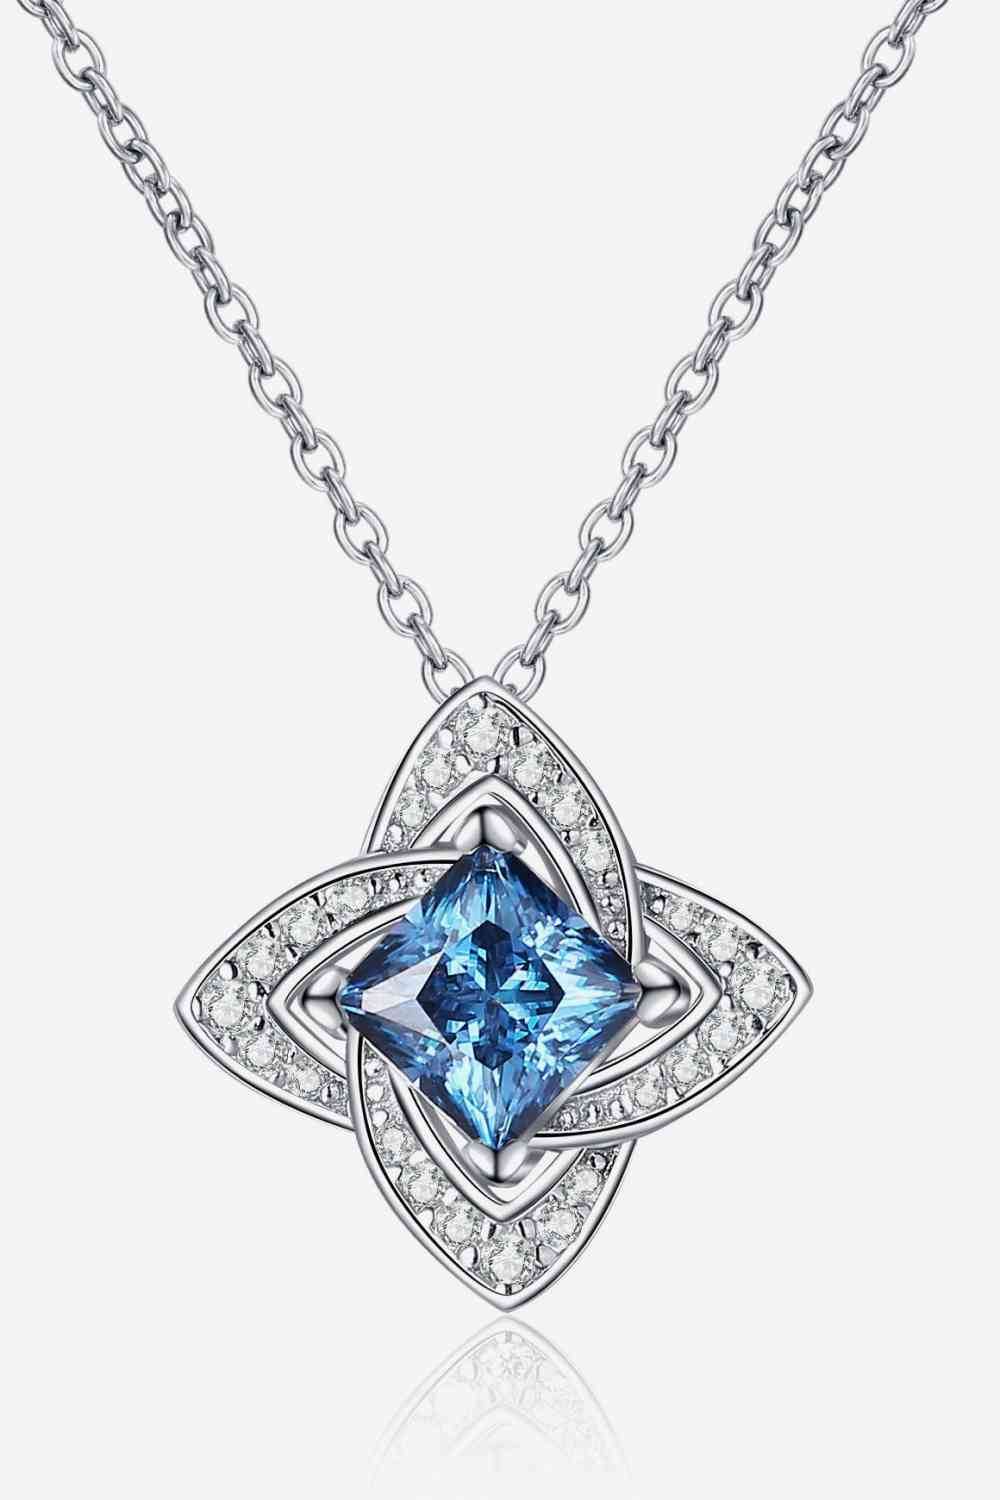 1 Carat Moissanite Floral Pendant Necklace - Shop Tophatter Deals, Electronics, Fashion, Jewelry, Health, Beauty, Home Decor, Free Shipping